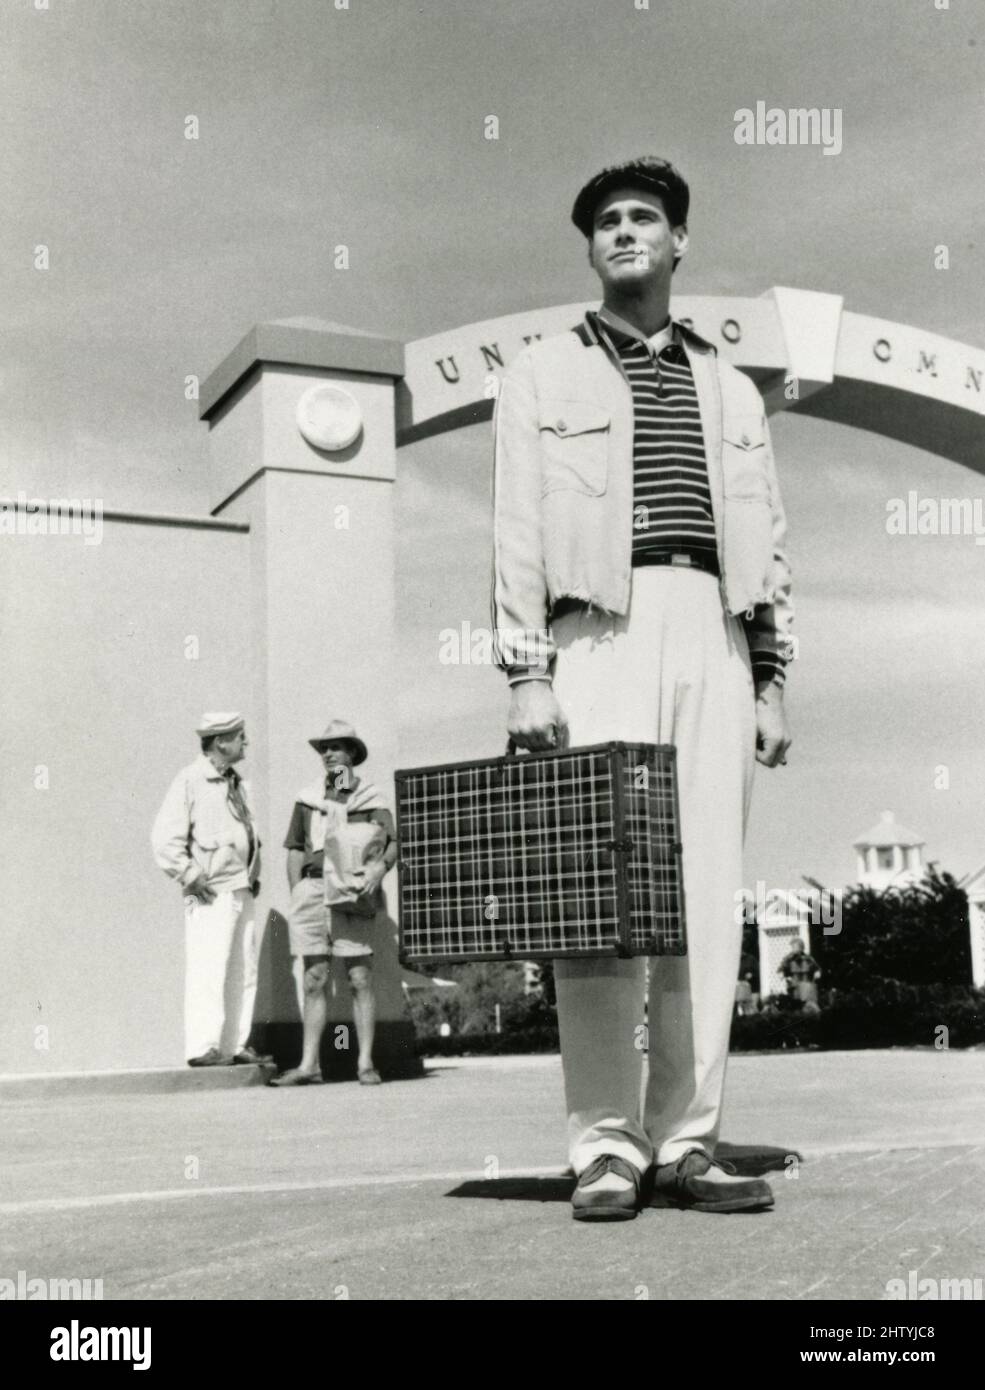 American actor Jim Carey in the movie The Truman Show, USA 1998 Stock Photo